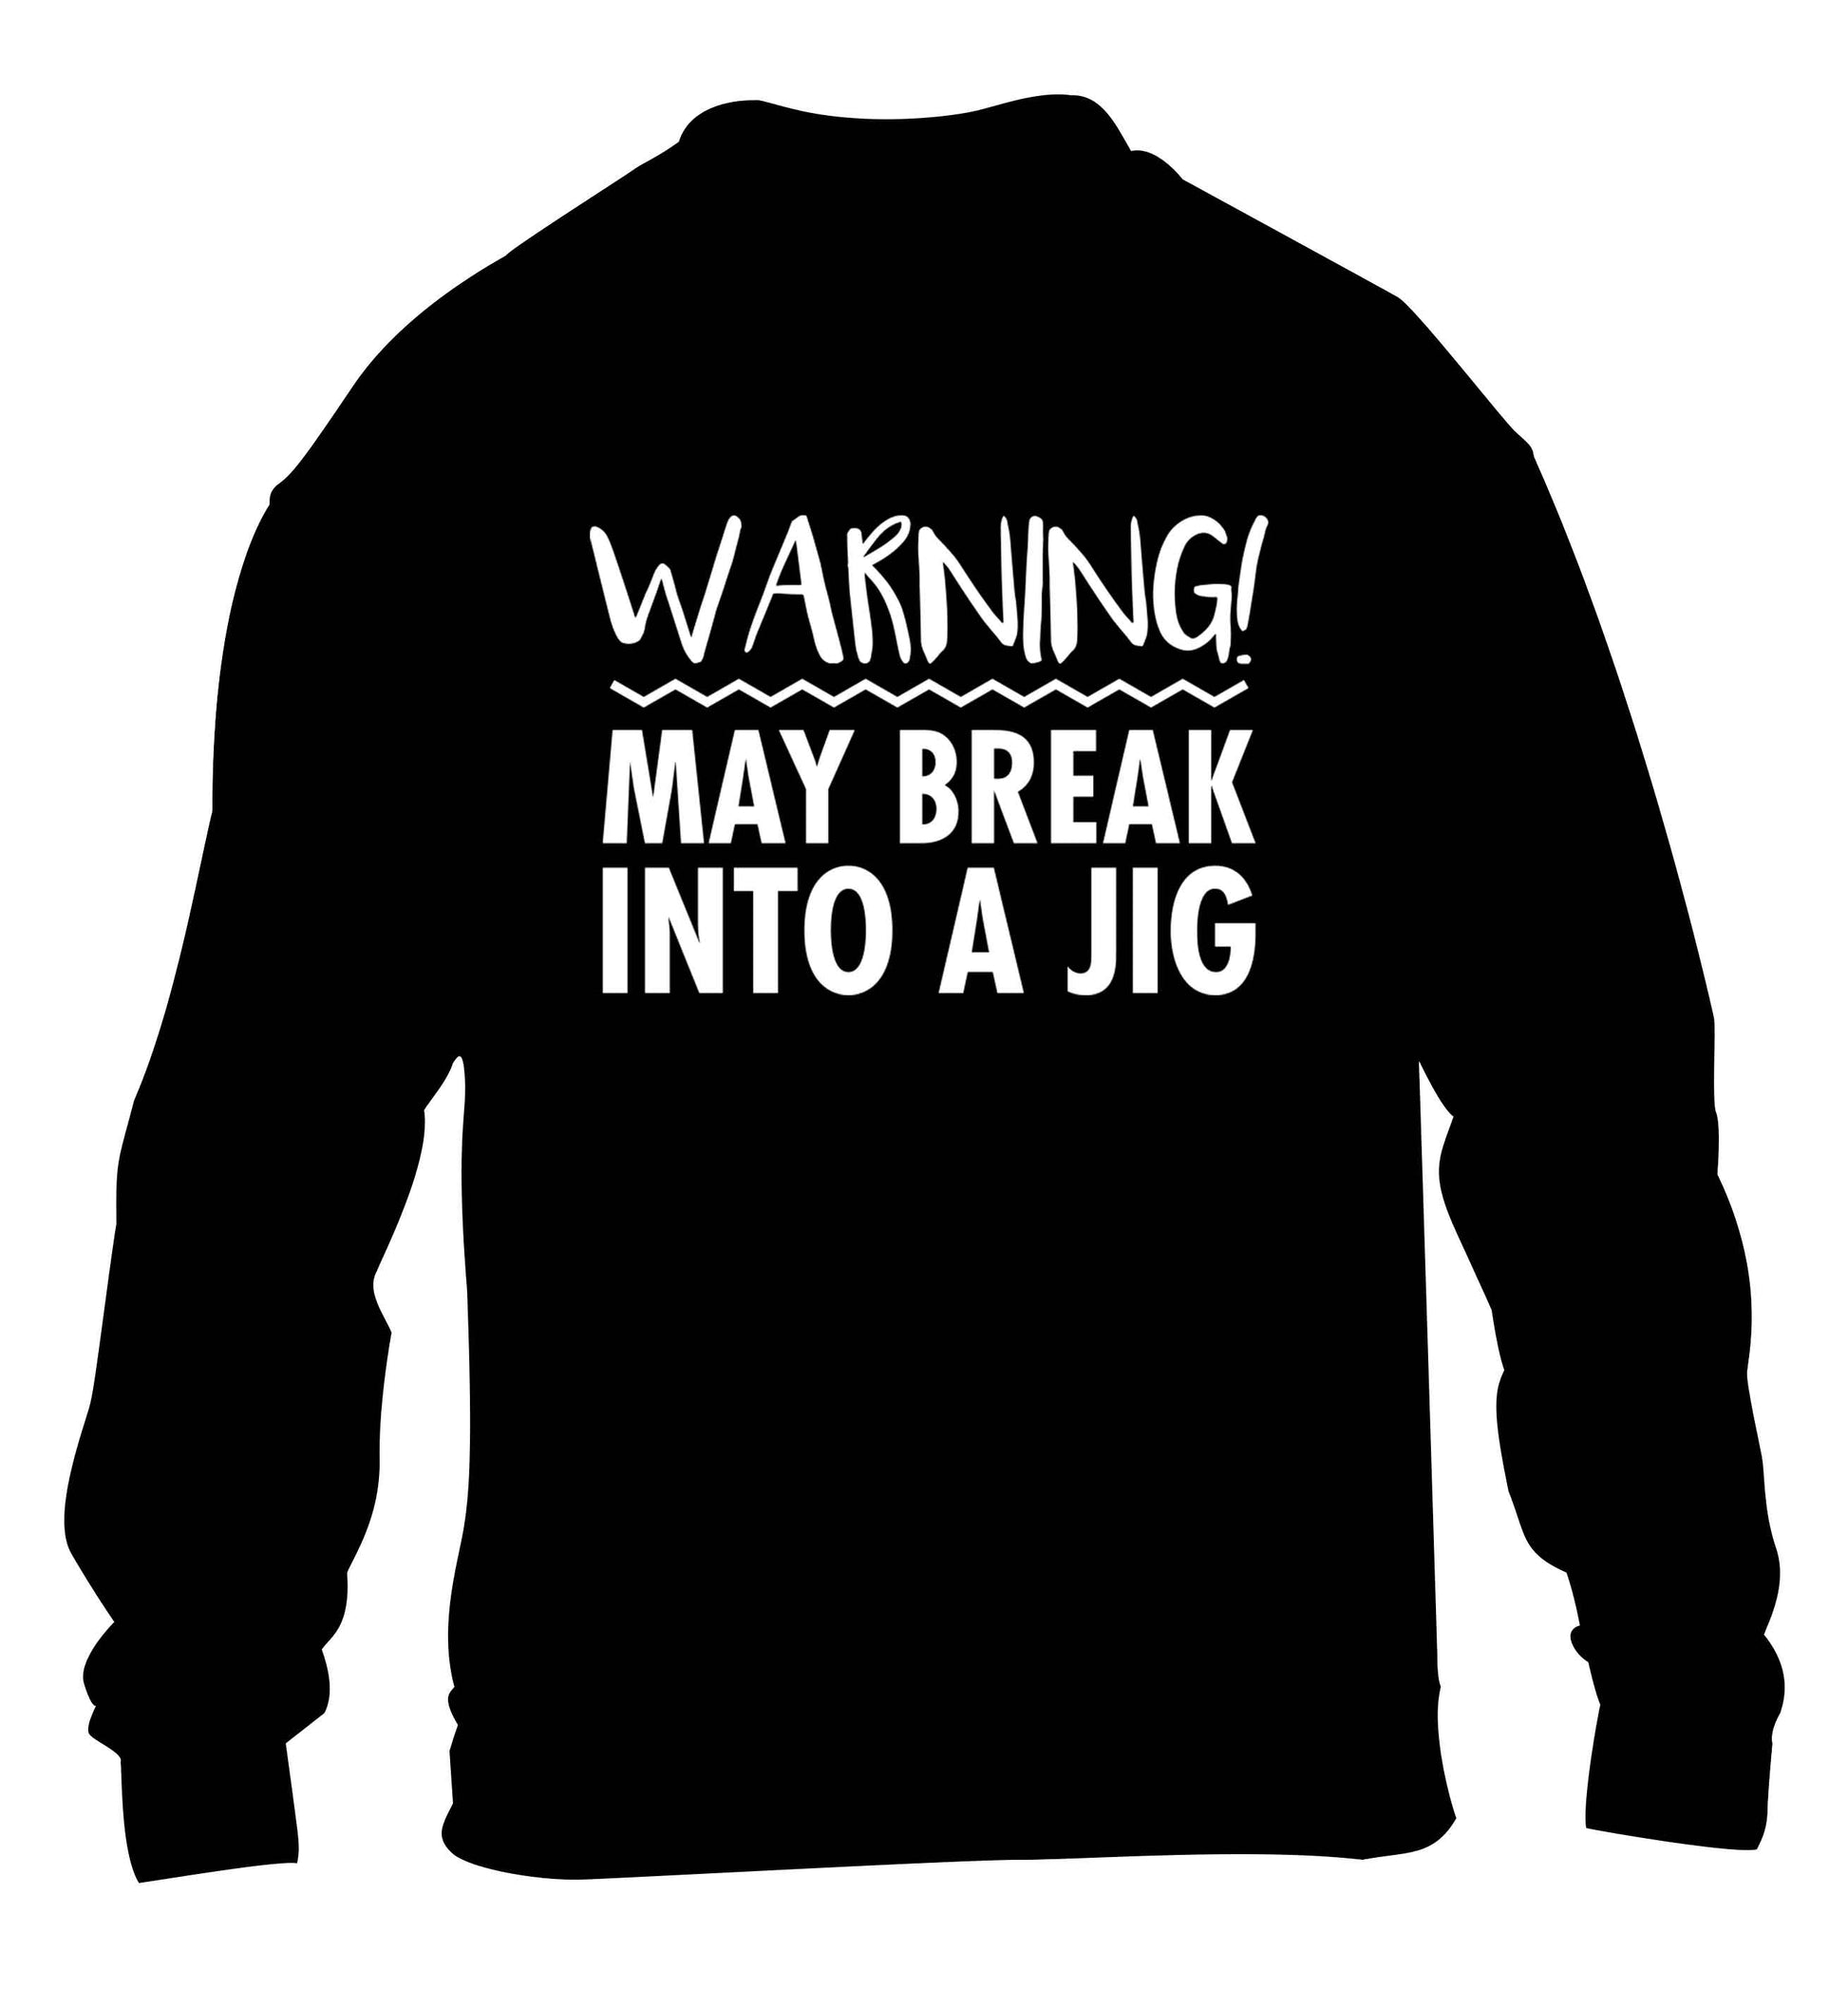 Warning may break into a jig children's black sweater 12-13 Years